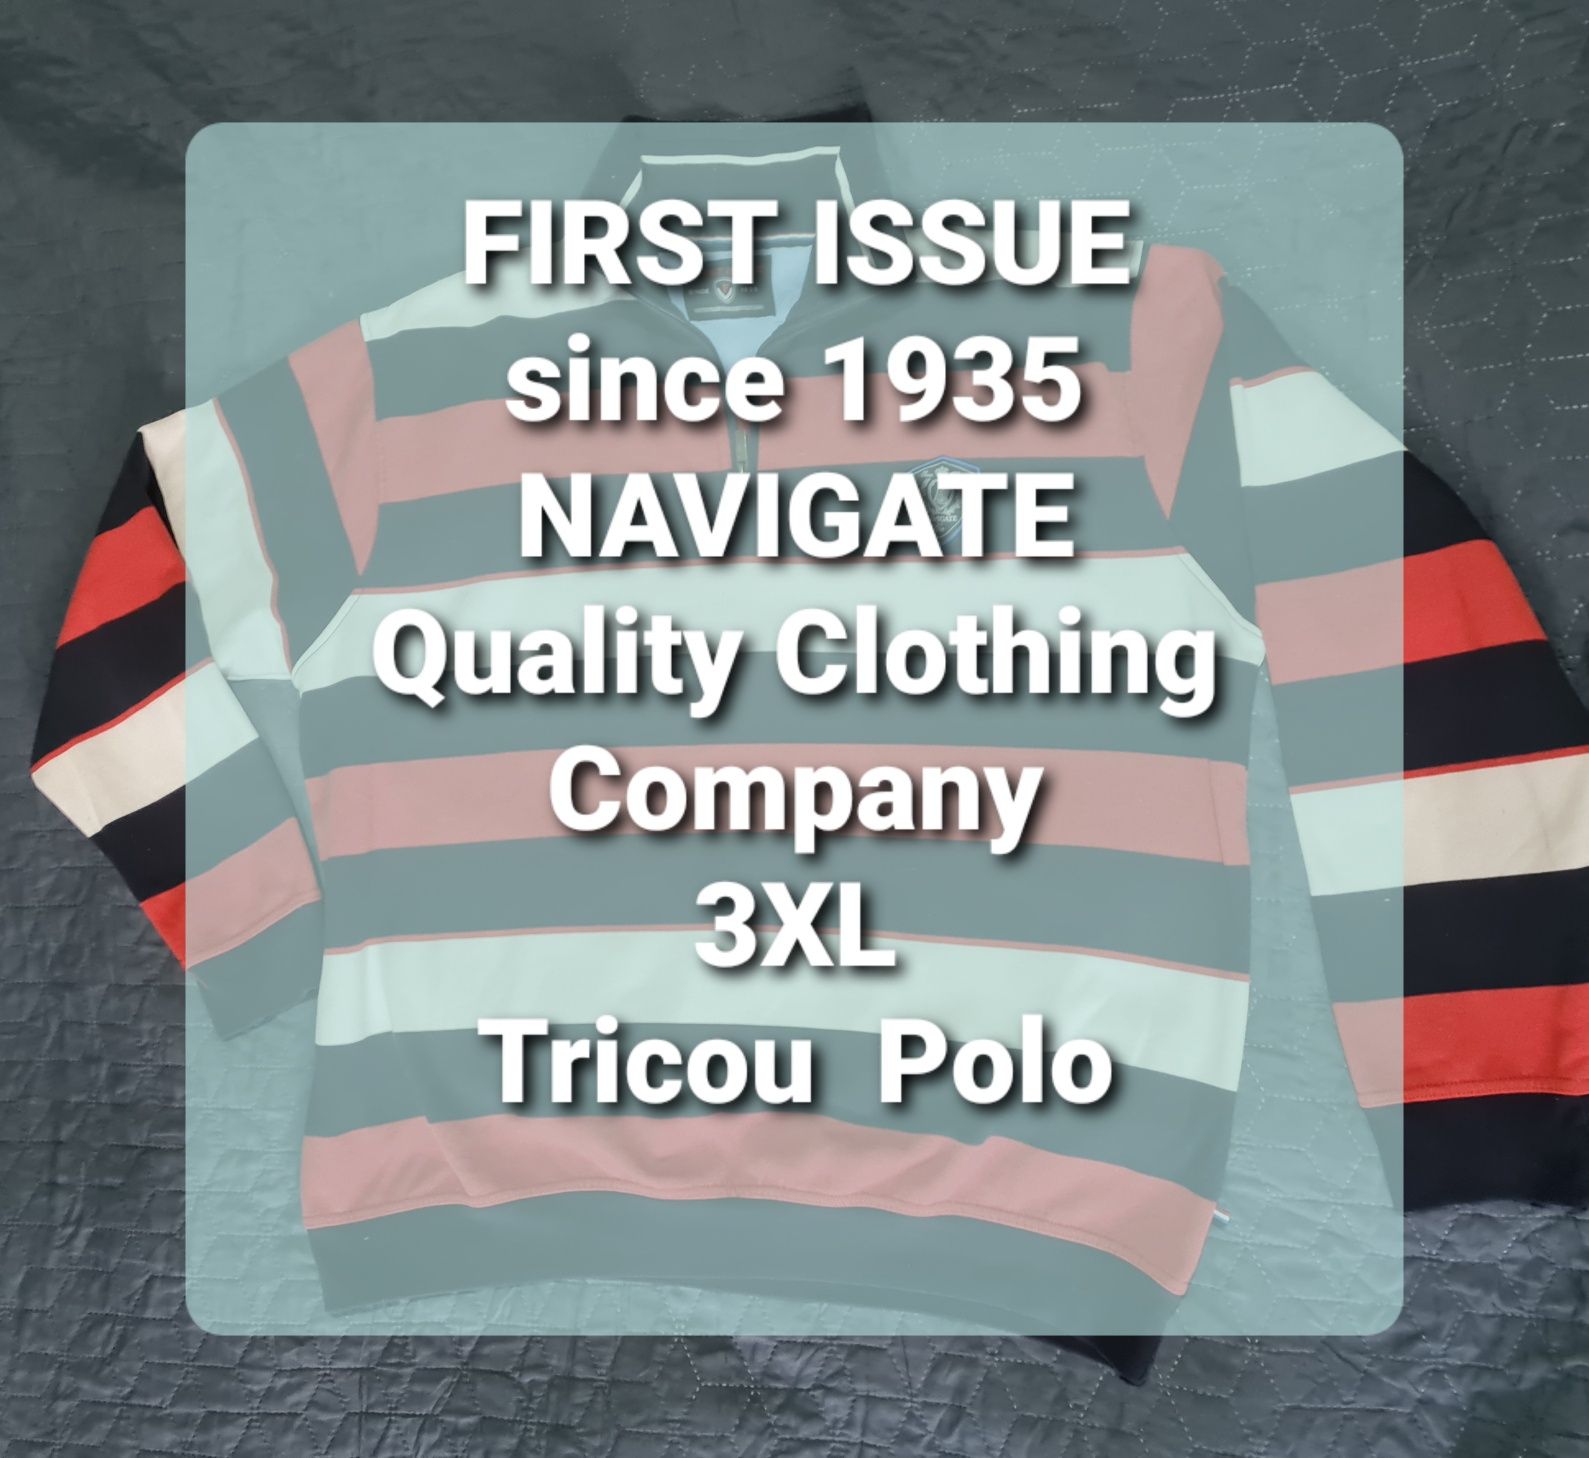 FIRSY ISSUE NAVIGATE, Quality Clothing Company, sincer 1935, masura 3X